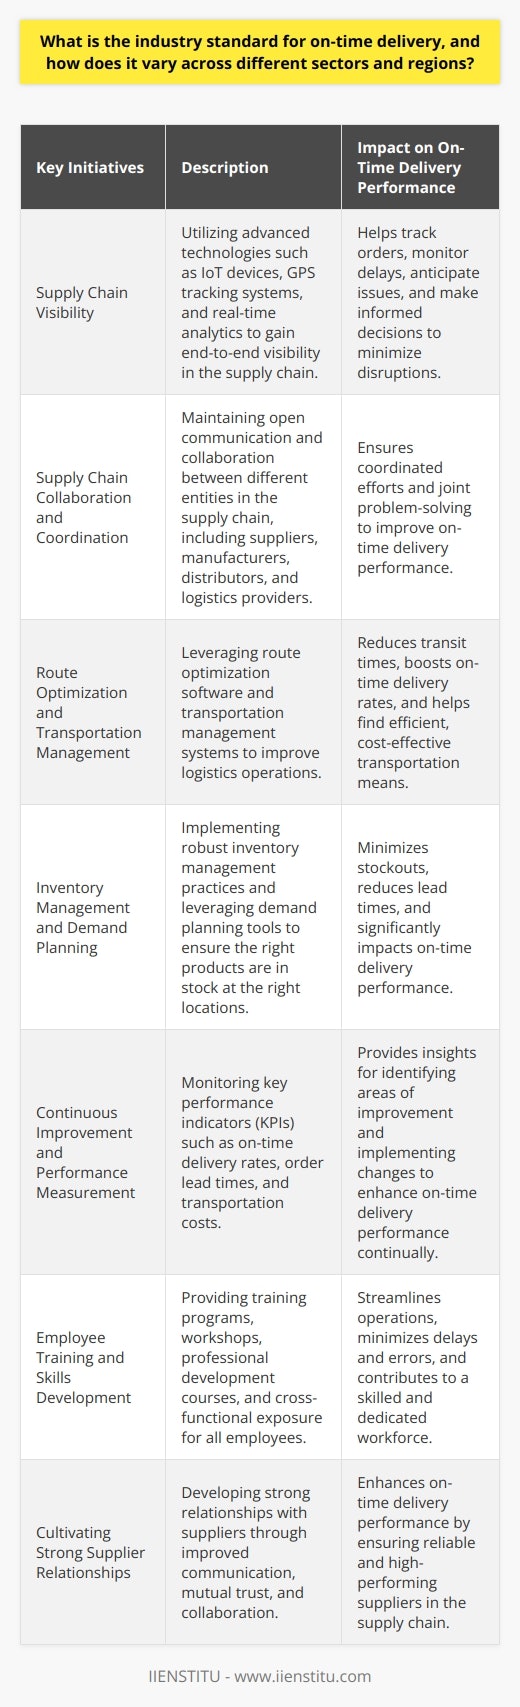 Key Initiatives to Improve On-Time Delivery PerformanceTo meet the industry standards of on-time delivery as per the unique requirements of different sectors and regions, businesses should focus on implementing various key initiatives and best practices.1. Supply Chain Visibility: Gaining end-to-end visibility into the supply chain helps companies track orders, monitor delays, anticipate potential issues, and make informed decisions to minimize disruptions. This can be achieved by employing advanced technologies such as IoT devices, GPS tracking systems, and real-time analytics.2. Supply Chain Collaboration and Coordination: Maintaining open communication and collaboration between different entities in the supply chain, including suppliers, manufacturers, distributors, and logistics providers, is critical in ensuring coordinated efforts and joint problem-solving to improve on-time delivery performance.3. Route Optimization and Transportation Management: Leveraging route optimization software and transportation management systems can help businesses improve their logistics operations, reducing transit times, and boosting on-time delivery rates. These technologies can also assist in finding the most efficient and cost-effective means of transportation, taking into consideration factors like traffic patterns, weather conditions, and driver availability.4. Inventory Management and Demand Planning: Implementing robust inventory management practices and leveraging demand planning tools can ensure that companies have the right products in stock at the right locations. Accurate inventory management strategies can profoundly impact on-time delivery performance as it helps minimize stockouts and reduce lead times.5. Continuous Improvement and Performance Measurement: Keeping track of key performance indicators (KPIs) such as on-time delivery rates, order lead times, and transportation costs can help businesses monitor their performance and effectiveness of their supply chain strategies. Analyzing these data regularly can provide valuable insights to identify areas of improvement and implement necessary changes to enhance on-time delivery performance continually.6. Employee Training and Skills Development: Ensuring that all employees, from front-line customer service representatives to warehouse workers and drivers, are well-trained and skilled in their roles, can help streamline operations and minimize delays and errors in the supply chain. Regular training programs, workshops, professional development courses, and cross-functional exposure can contribute to a skilled and dedicated workforce.7. Cultivating Strong Supplier Relationships: Recognizing the importance of reliable and high-performing suppliers, companies should invest in developing strong relationships with their supplier base, which can lead to improved communication, mutual trust, and opportunities to work together on enhancing on-time delivery performance.By considering the unique requirements of different sectors and regions and focusing on these key initiatives, businesses can improve their on-time delivery performance and cater to the industry standards and customer expectations consistently. This will not only ensure customer satisfaction and loyalty but also drive operational excellence and competitive advantage in the market.